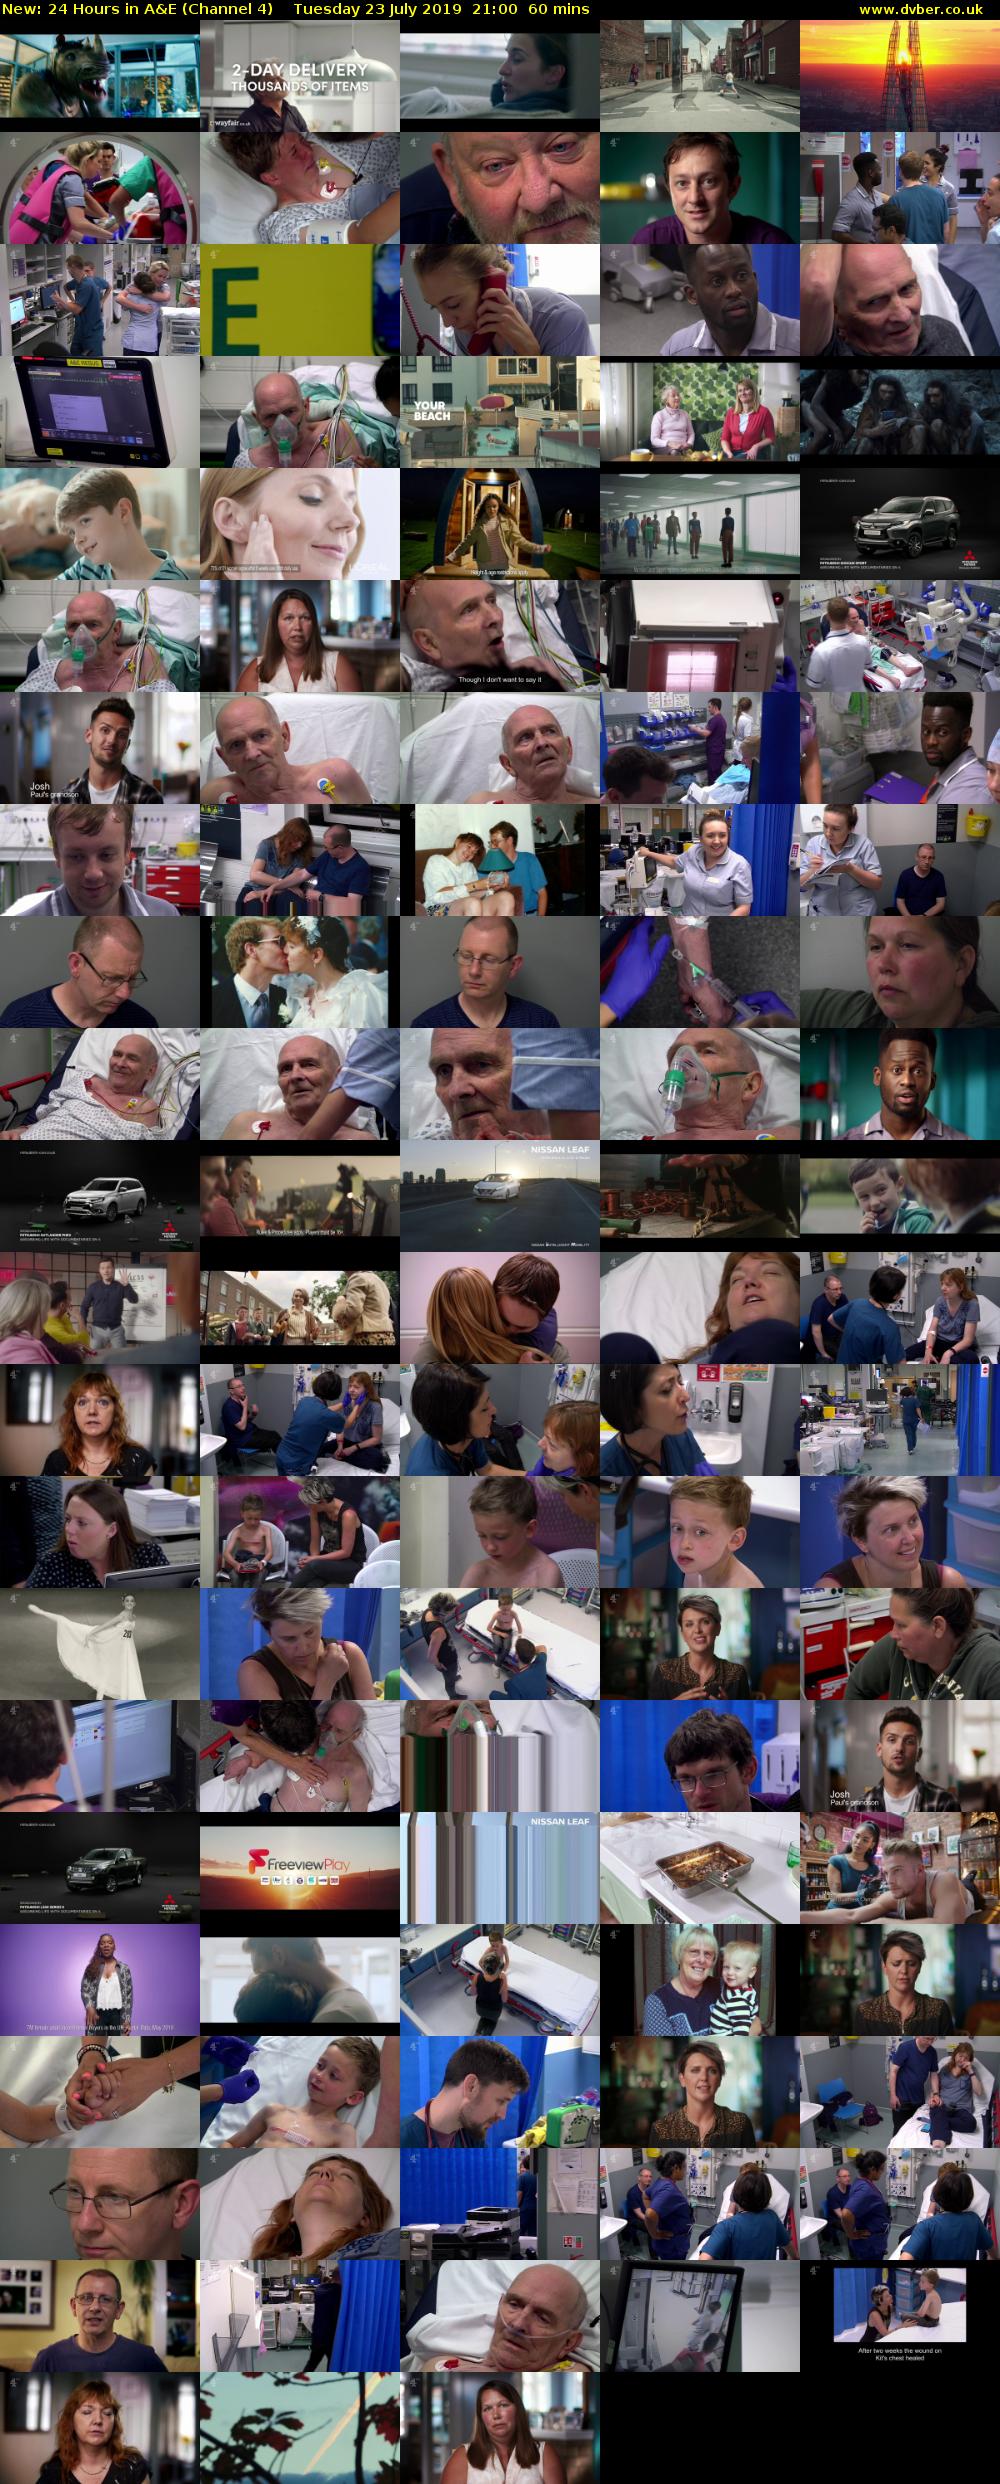 24 Hours in A&E (Channel 4) Tuesday 23 July 2019 21:00 - 22:00